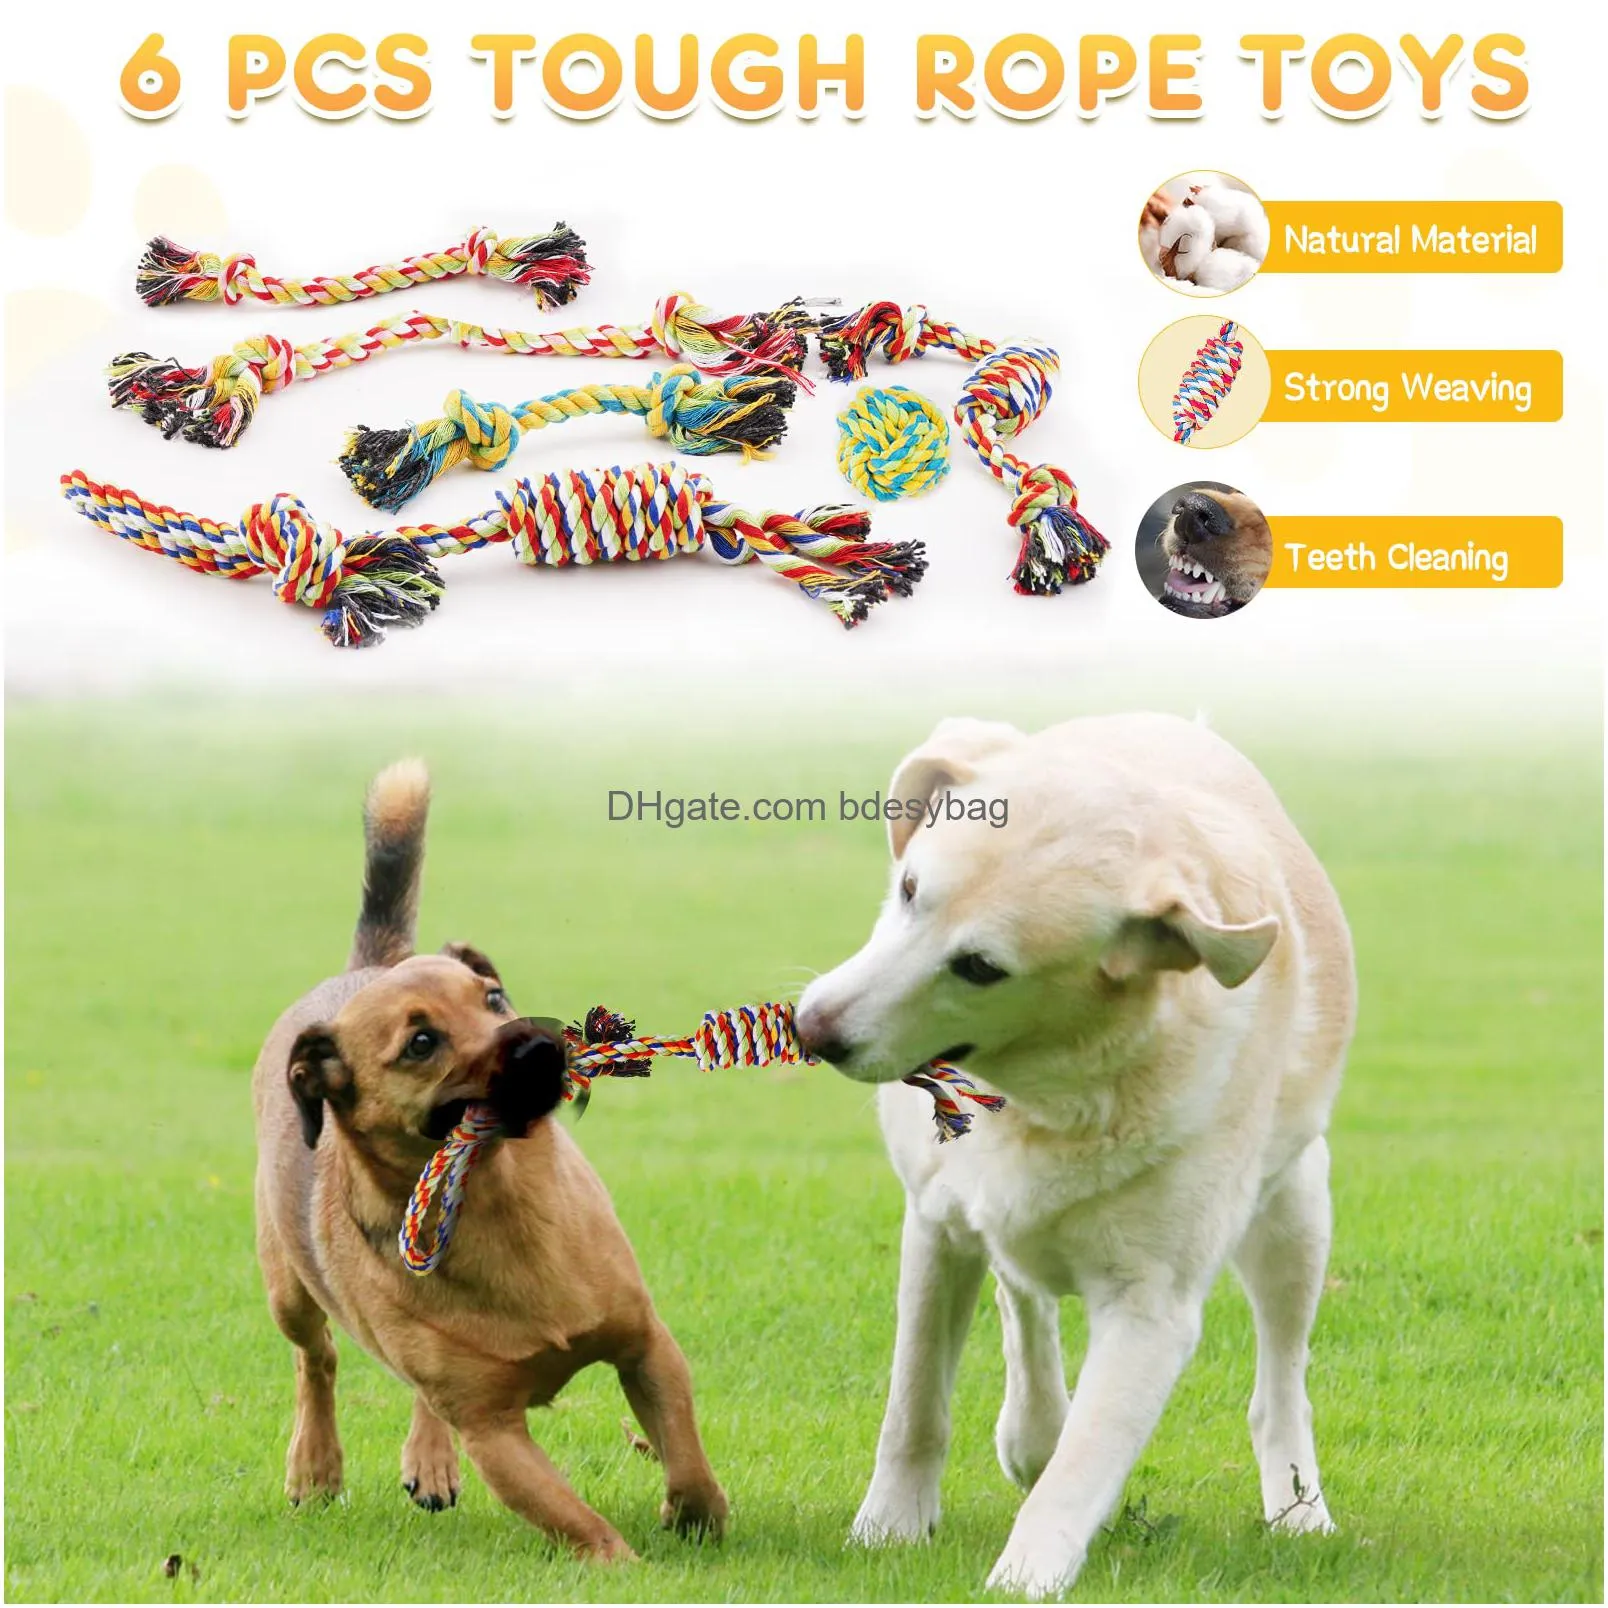 valued puppy toys for small dogs cute puppy teething chew toy with squeaky plush dog toys indestructible iq treat ball and tug of war dog rope toys